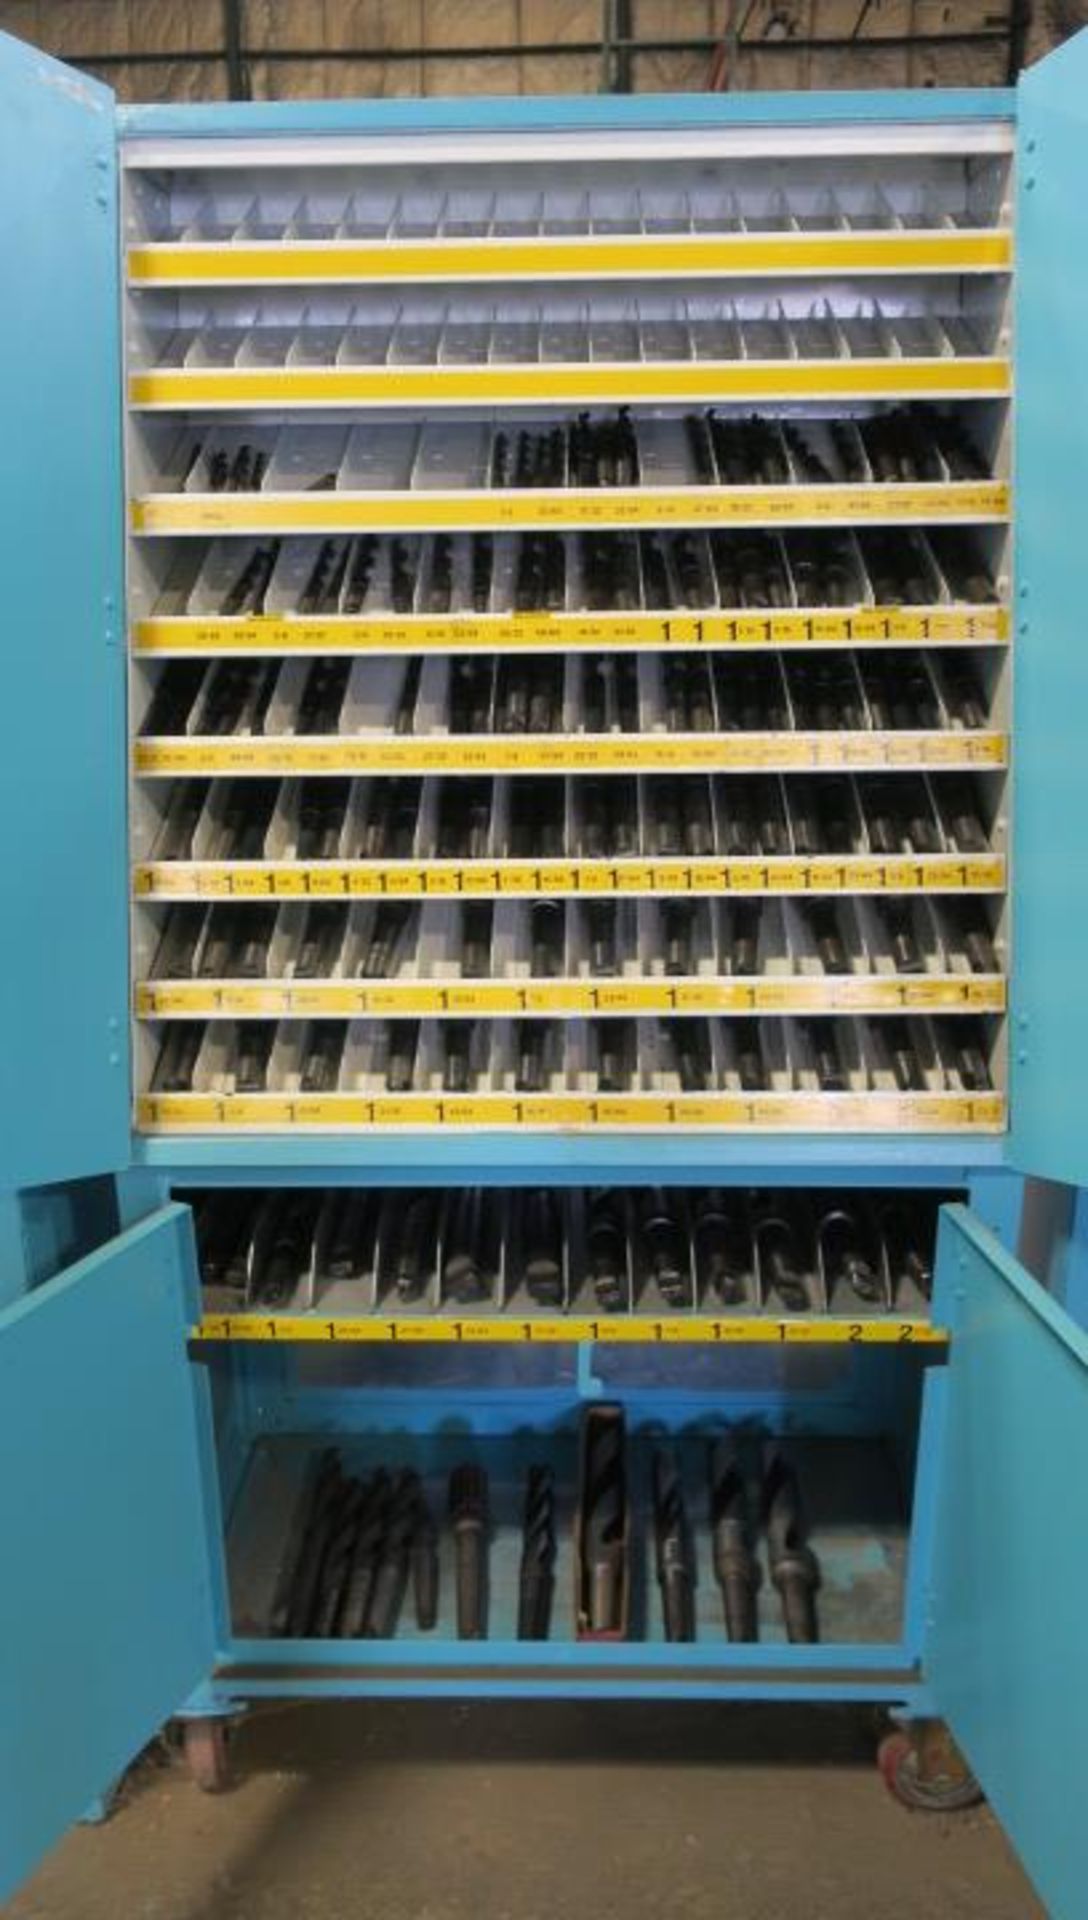 CABINET, w/large qty. of taper shank drills from 1/2" to 2-7/32" dia., in sorted trays